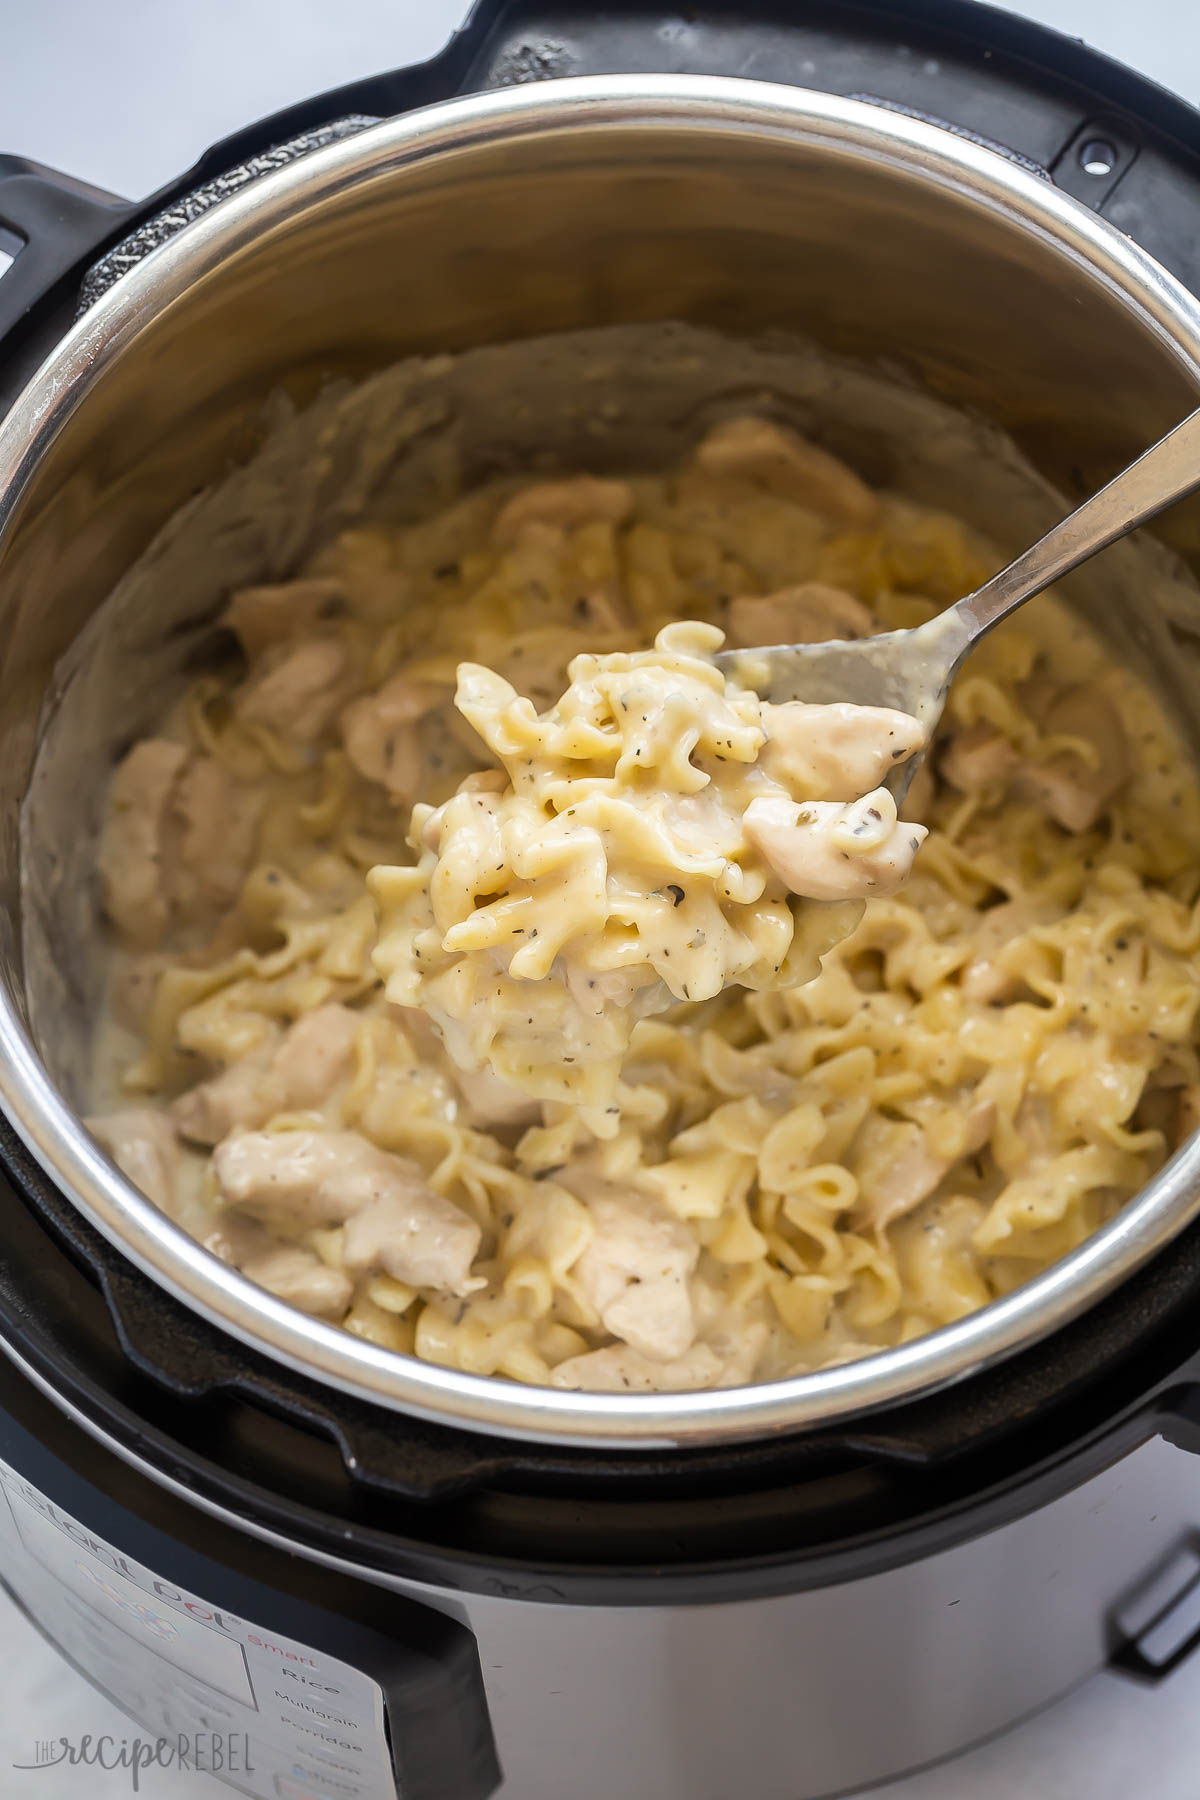 metal scoop scooping chicken and noodles from instant pot.